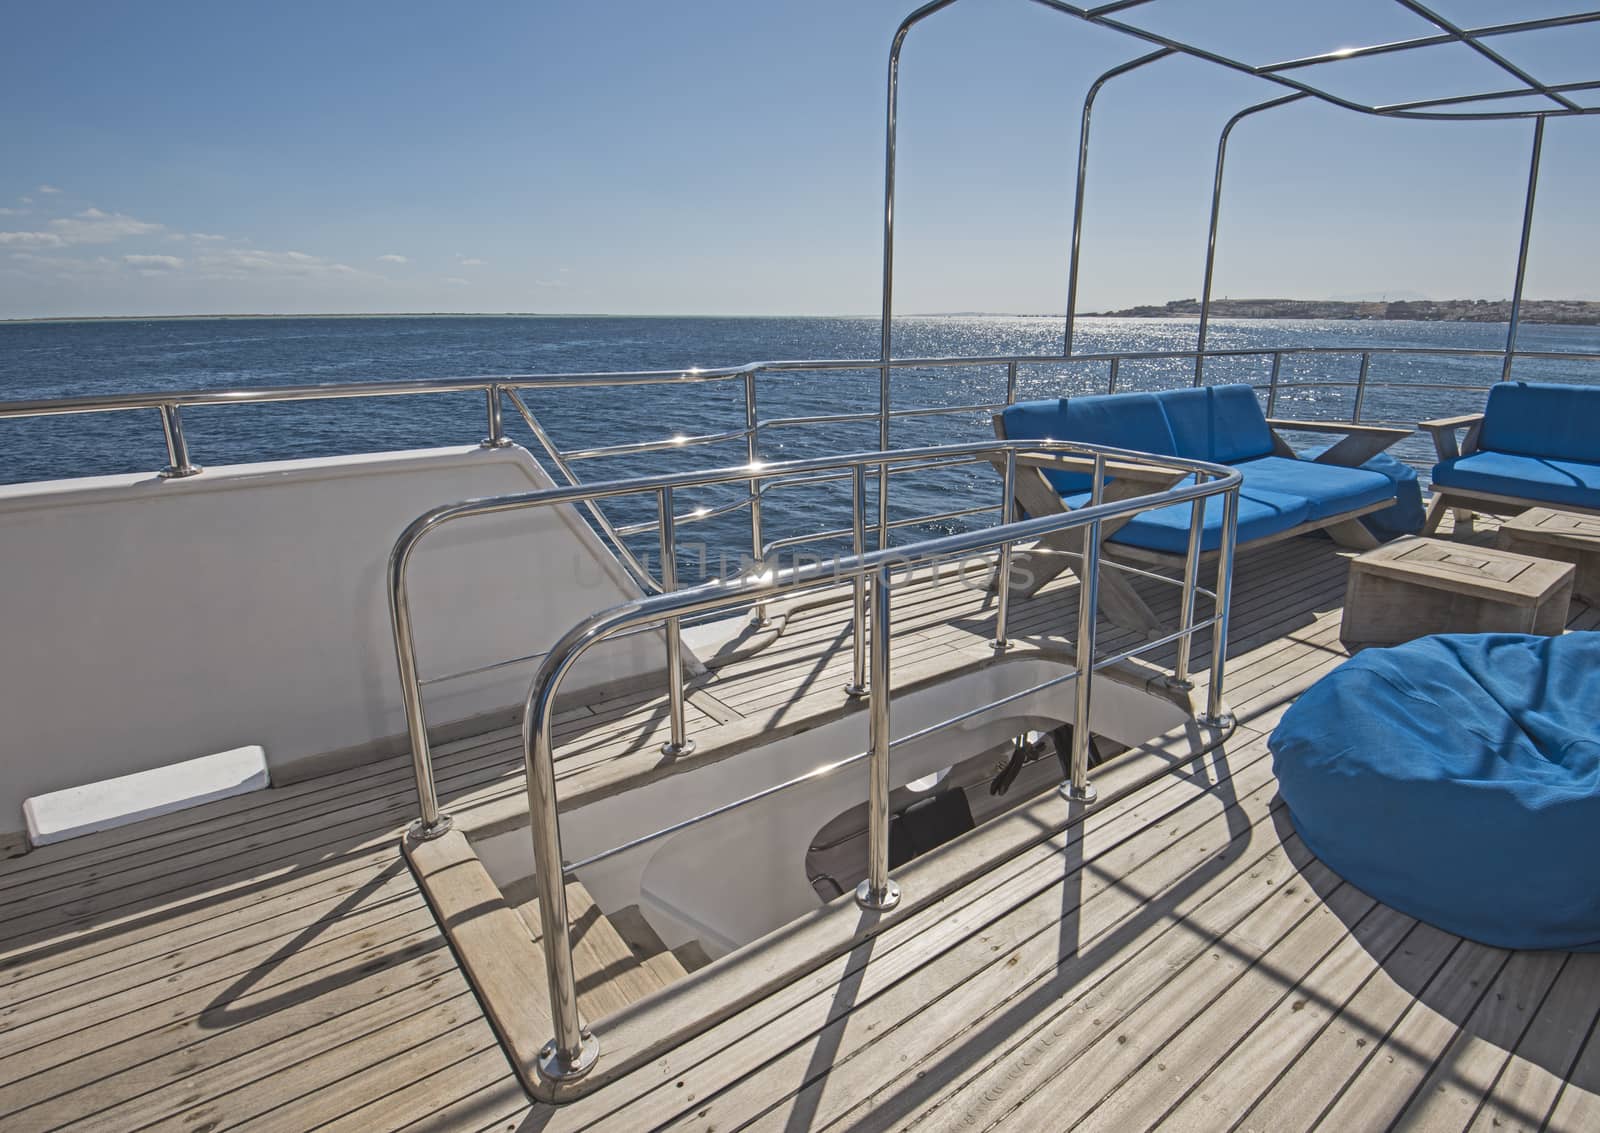 Stern teak sundeck of a large luxury motor yacht with chairs sofa table and tropical sea view background